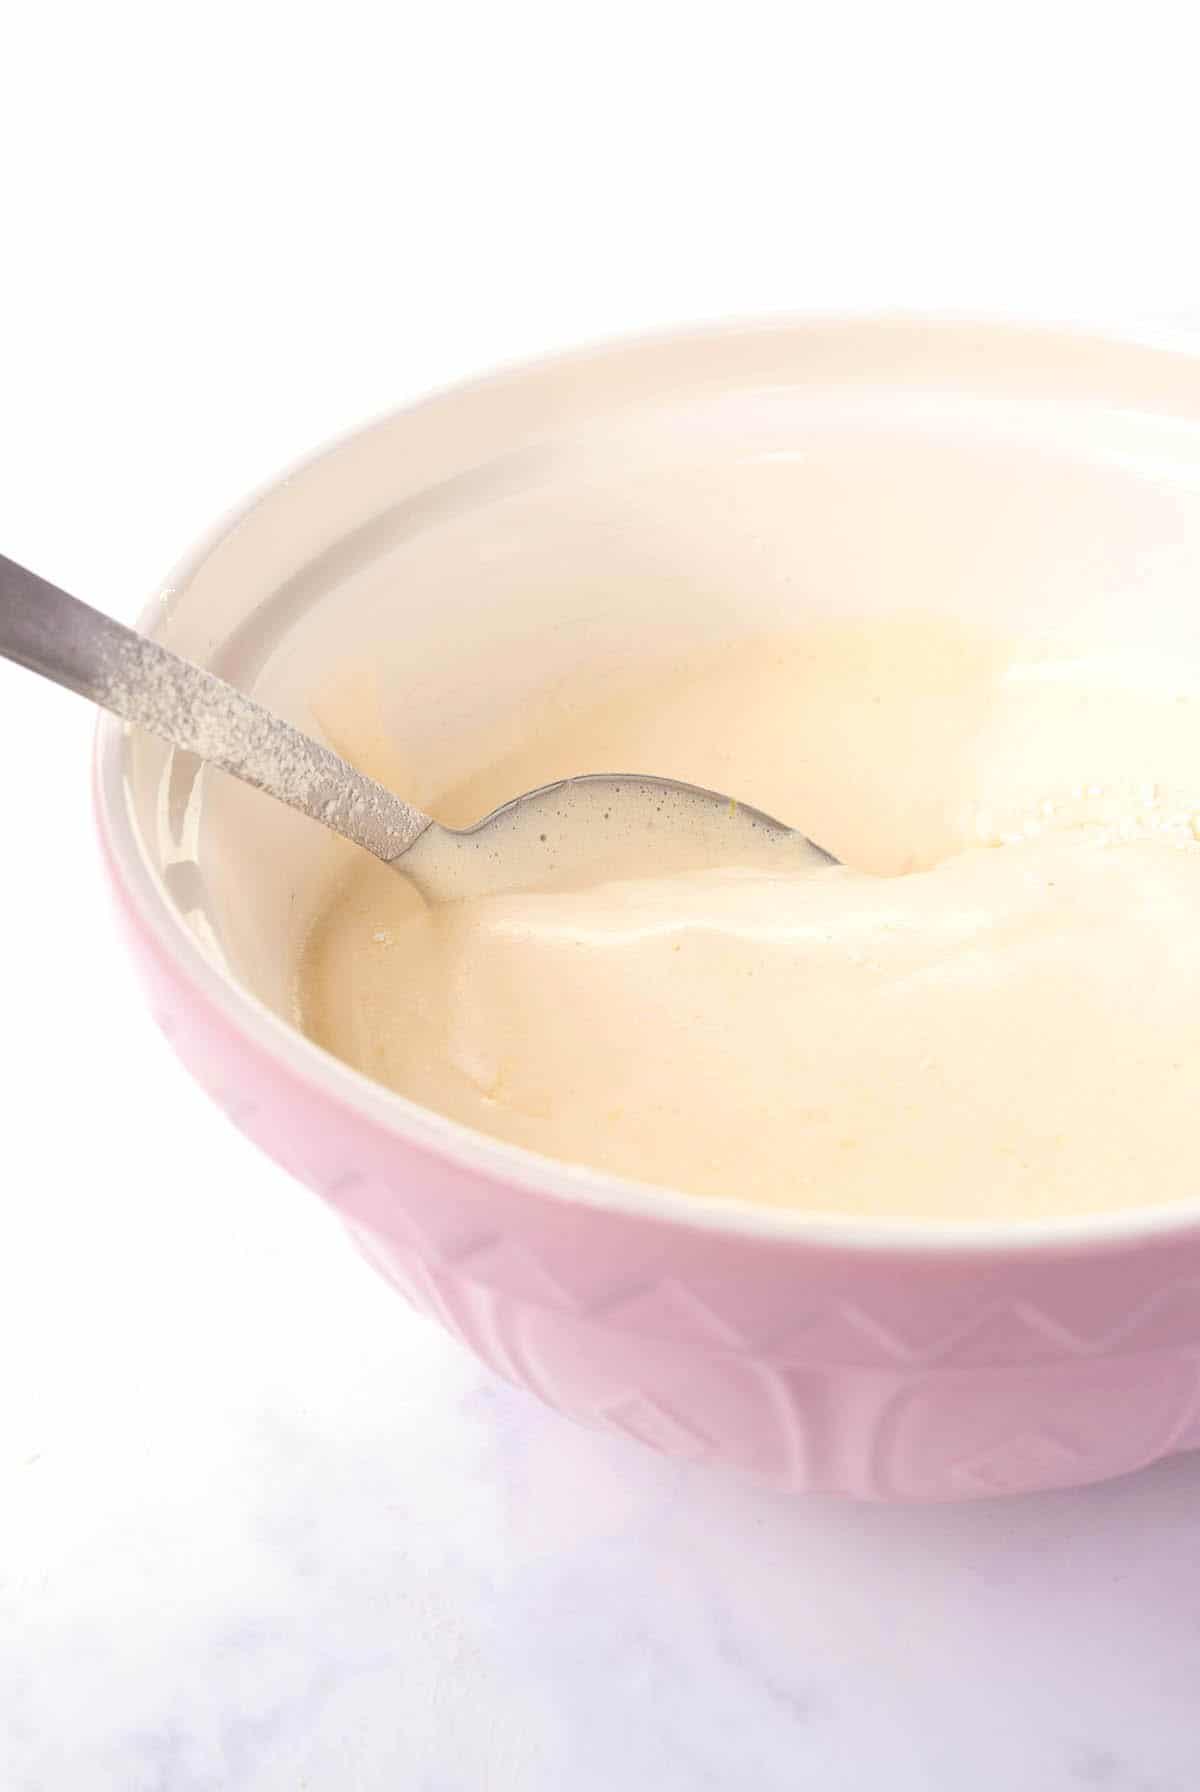 A pink mixing bowl full of fluffy cake batter.